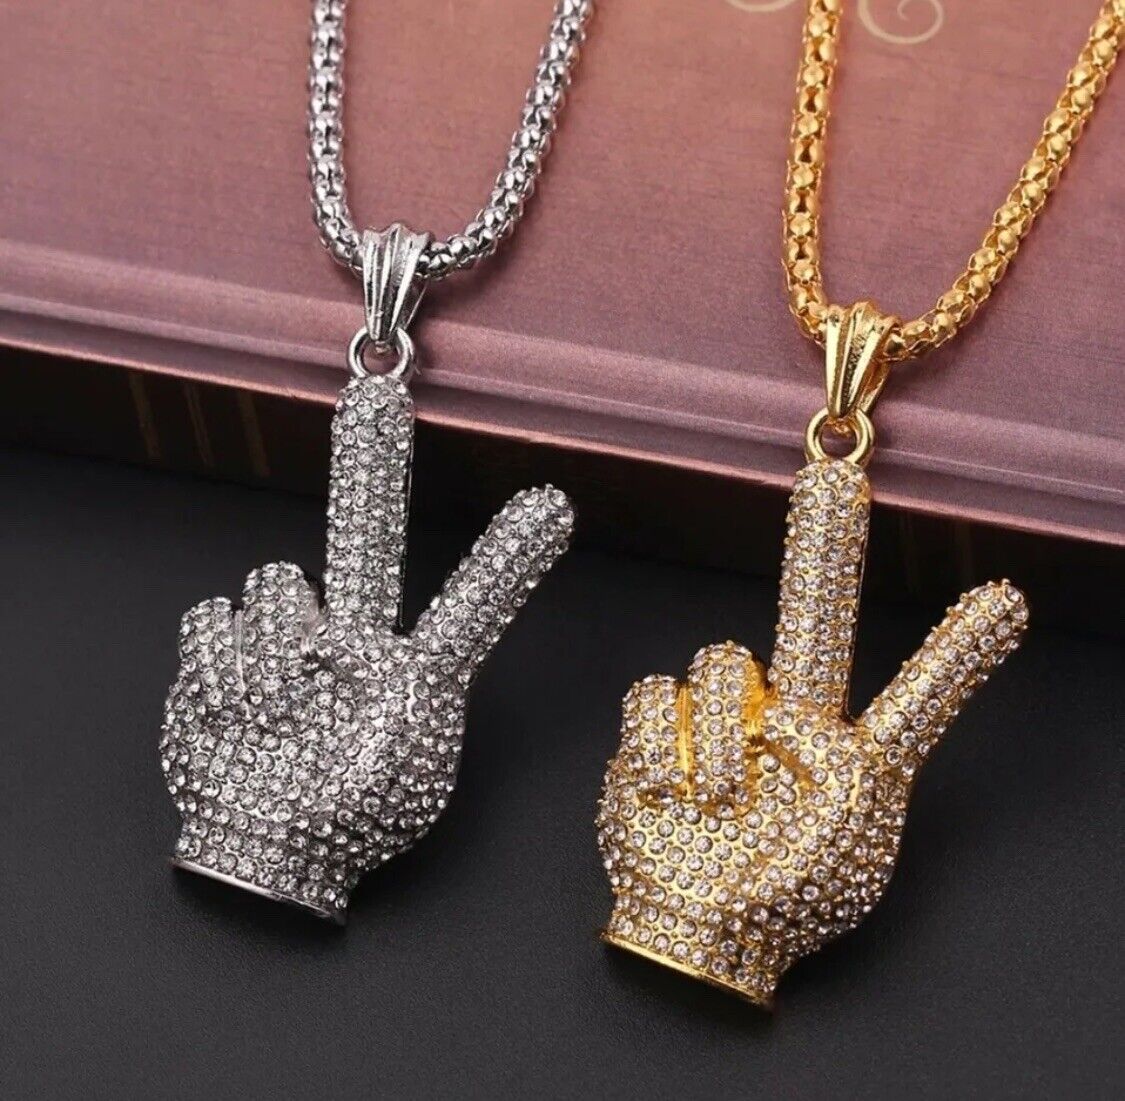 SILVER Iced Out Peace Middle Finger Hip Hop Necklace Jewellery  Chain Pendant